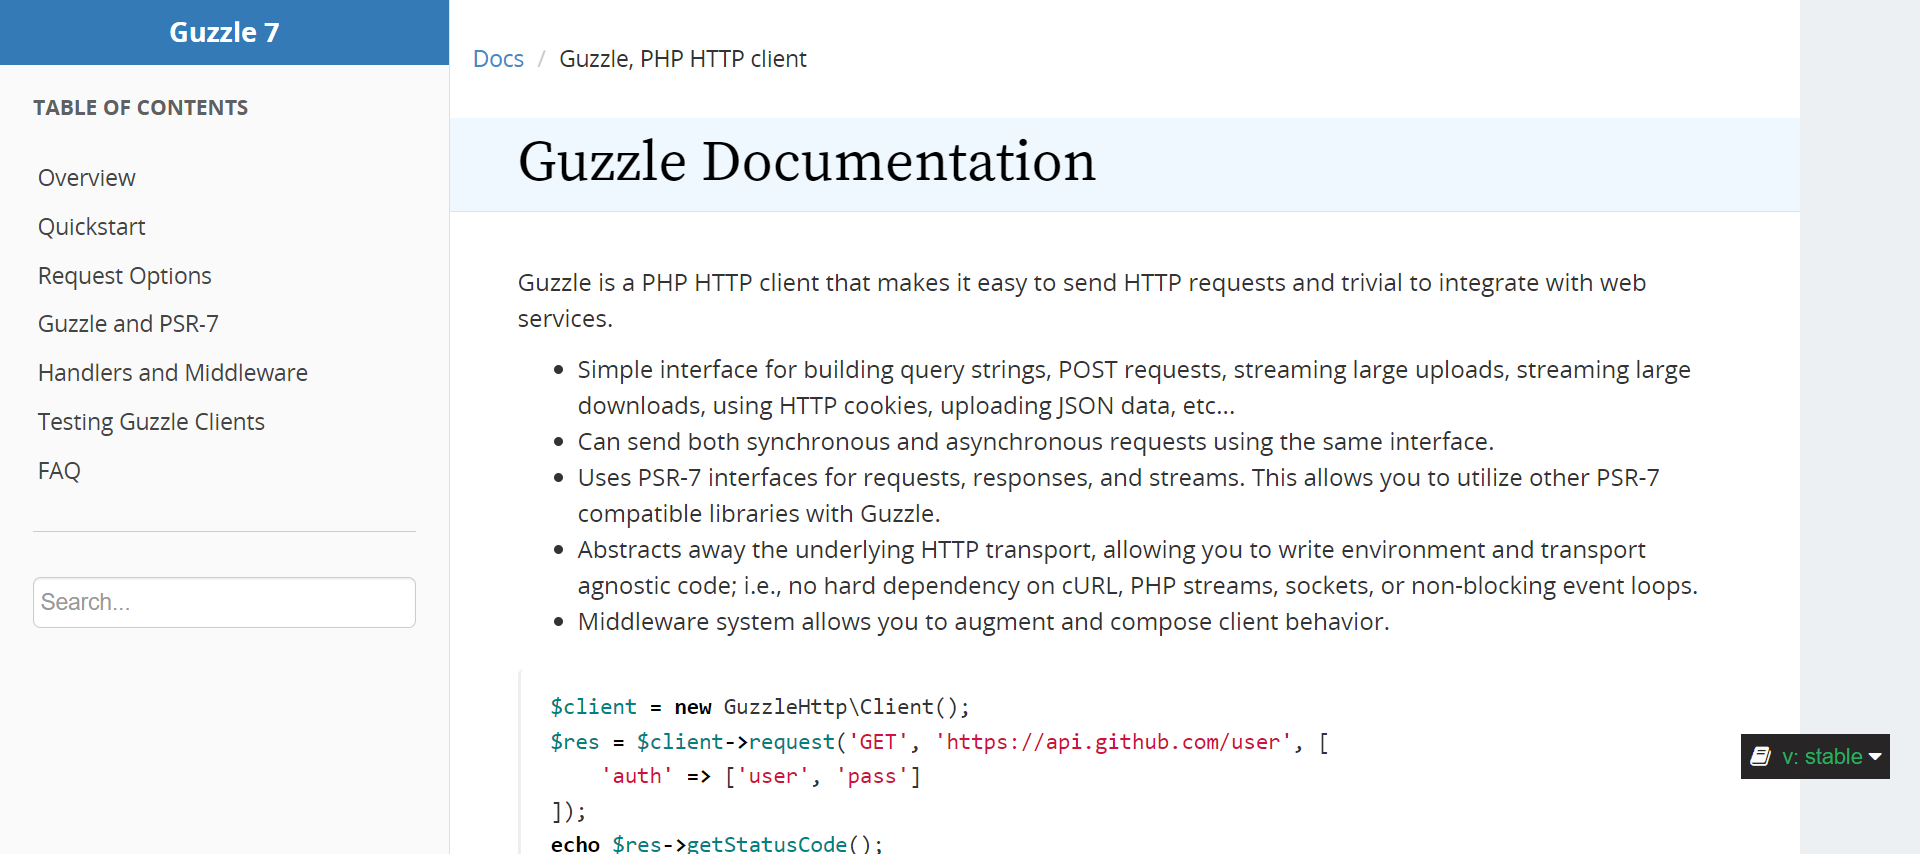 Guzzle php testing tool